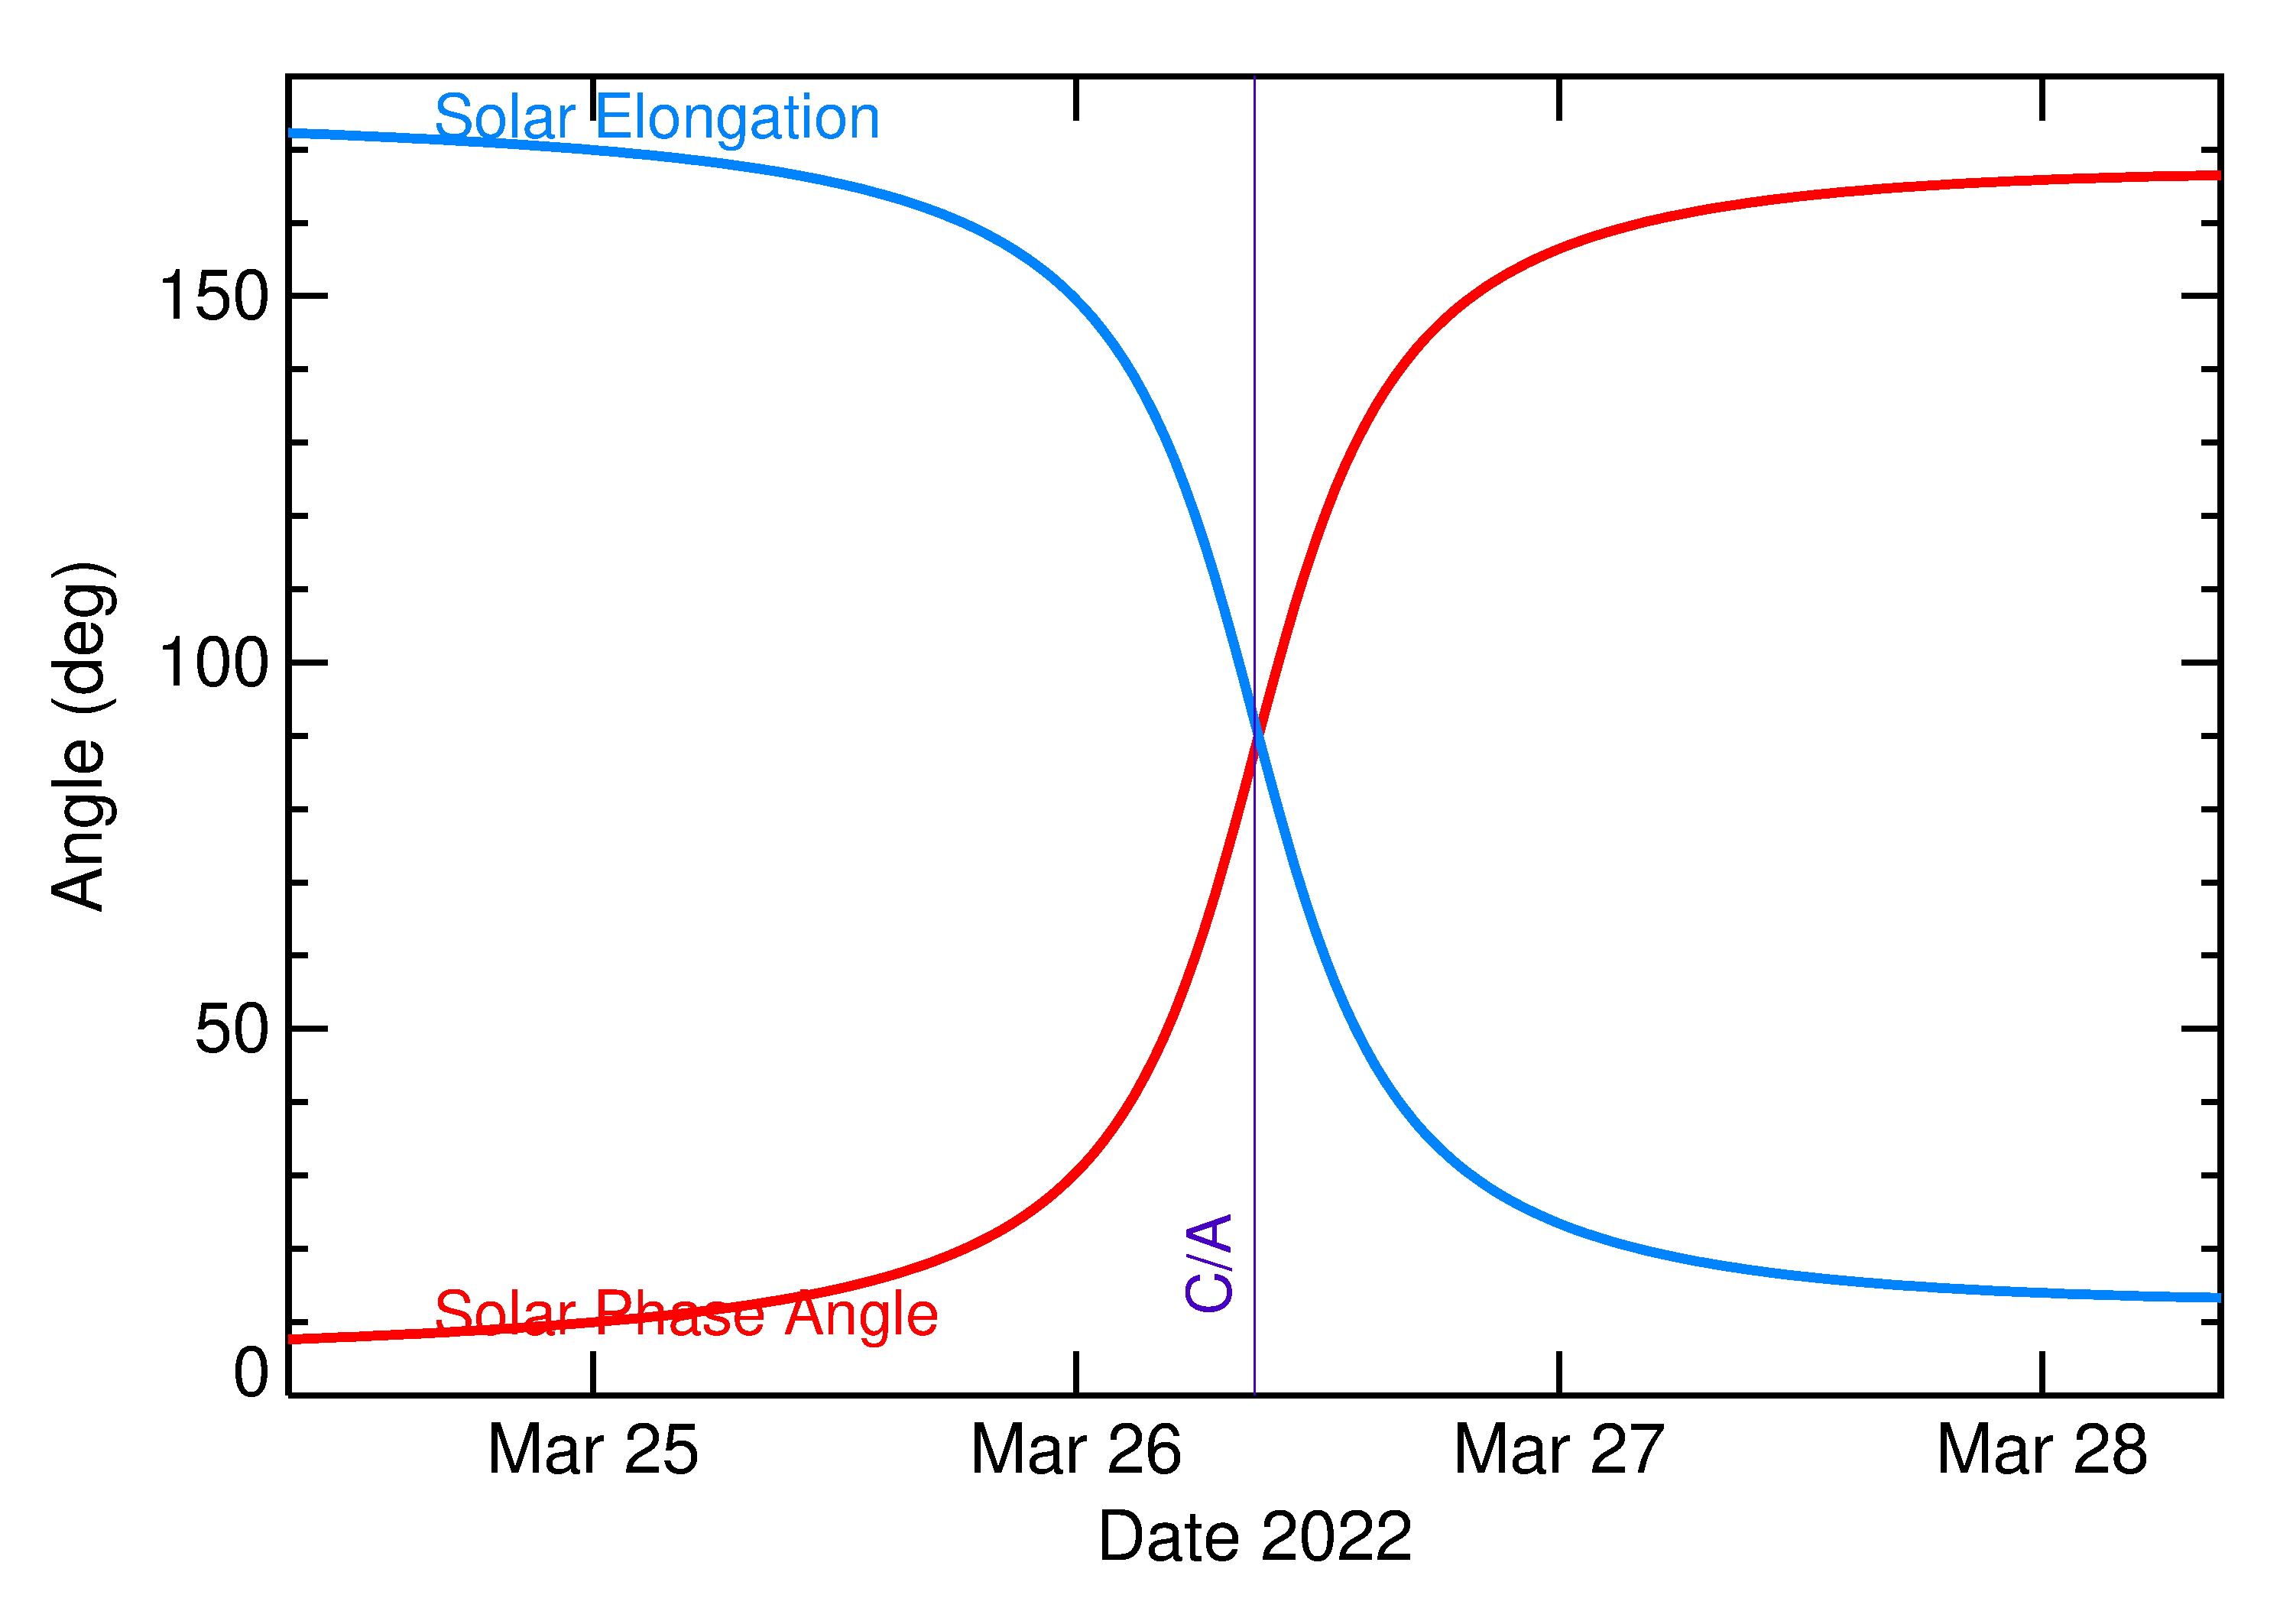 Solar Elongation and Solar Phase Angle of 2022 FA1 in the days around closest approach